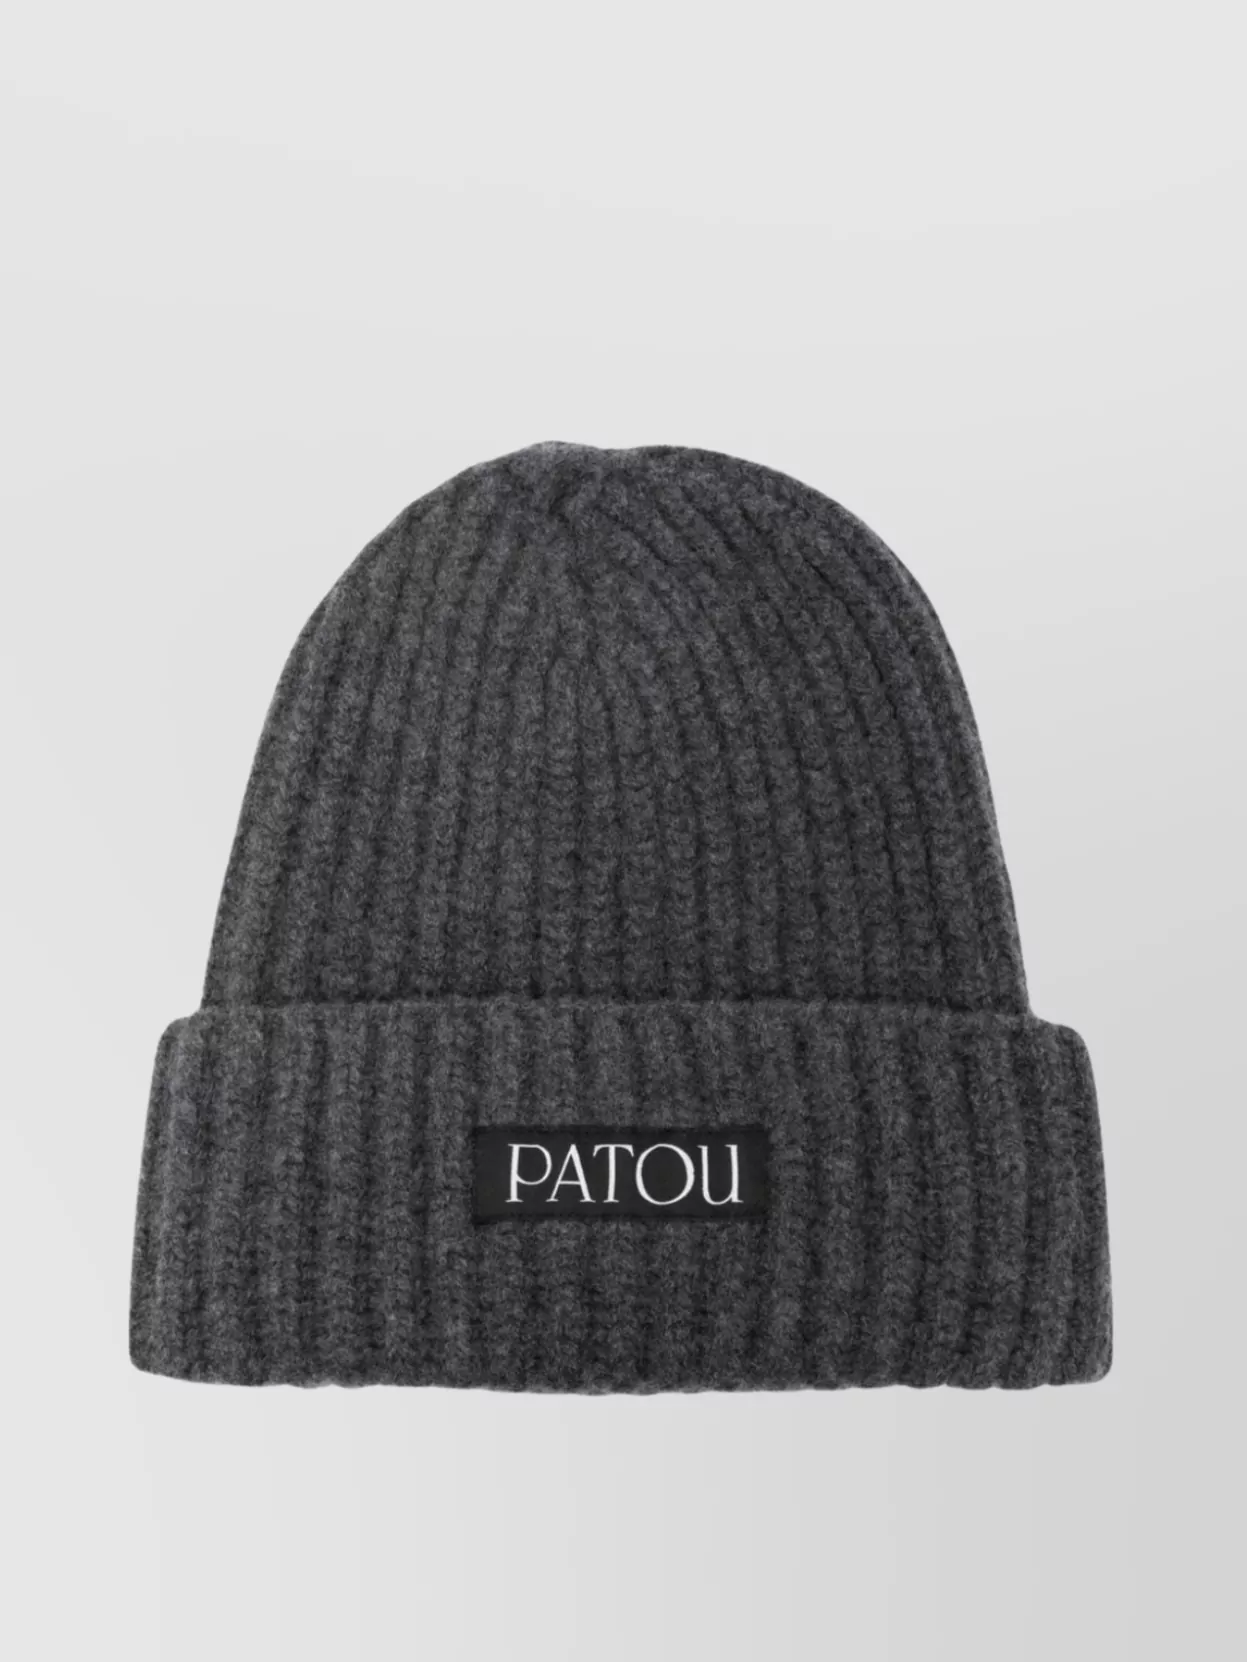 Patou Ribbed Knit Turn-up Beanie In Black